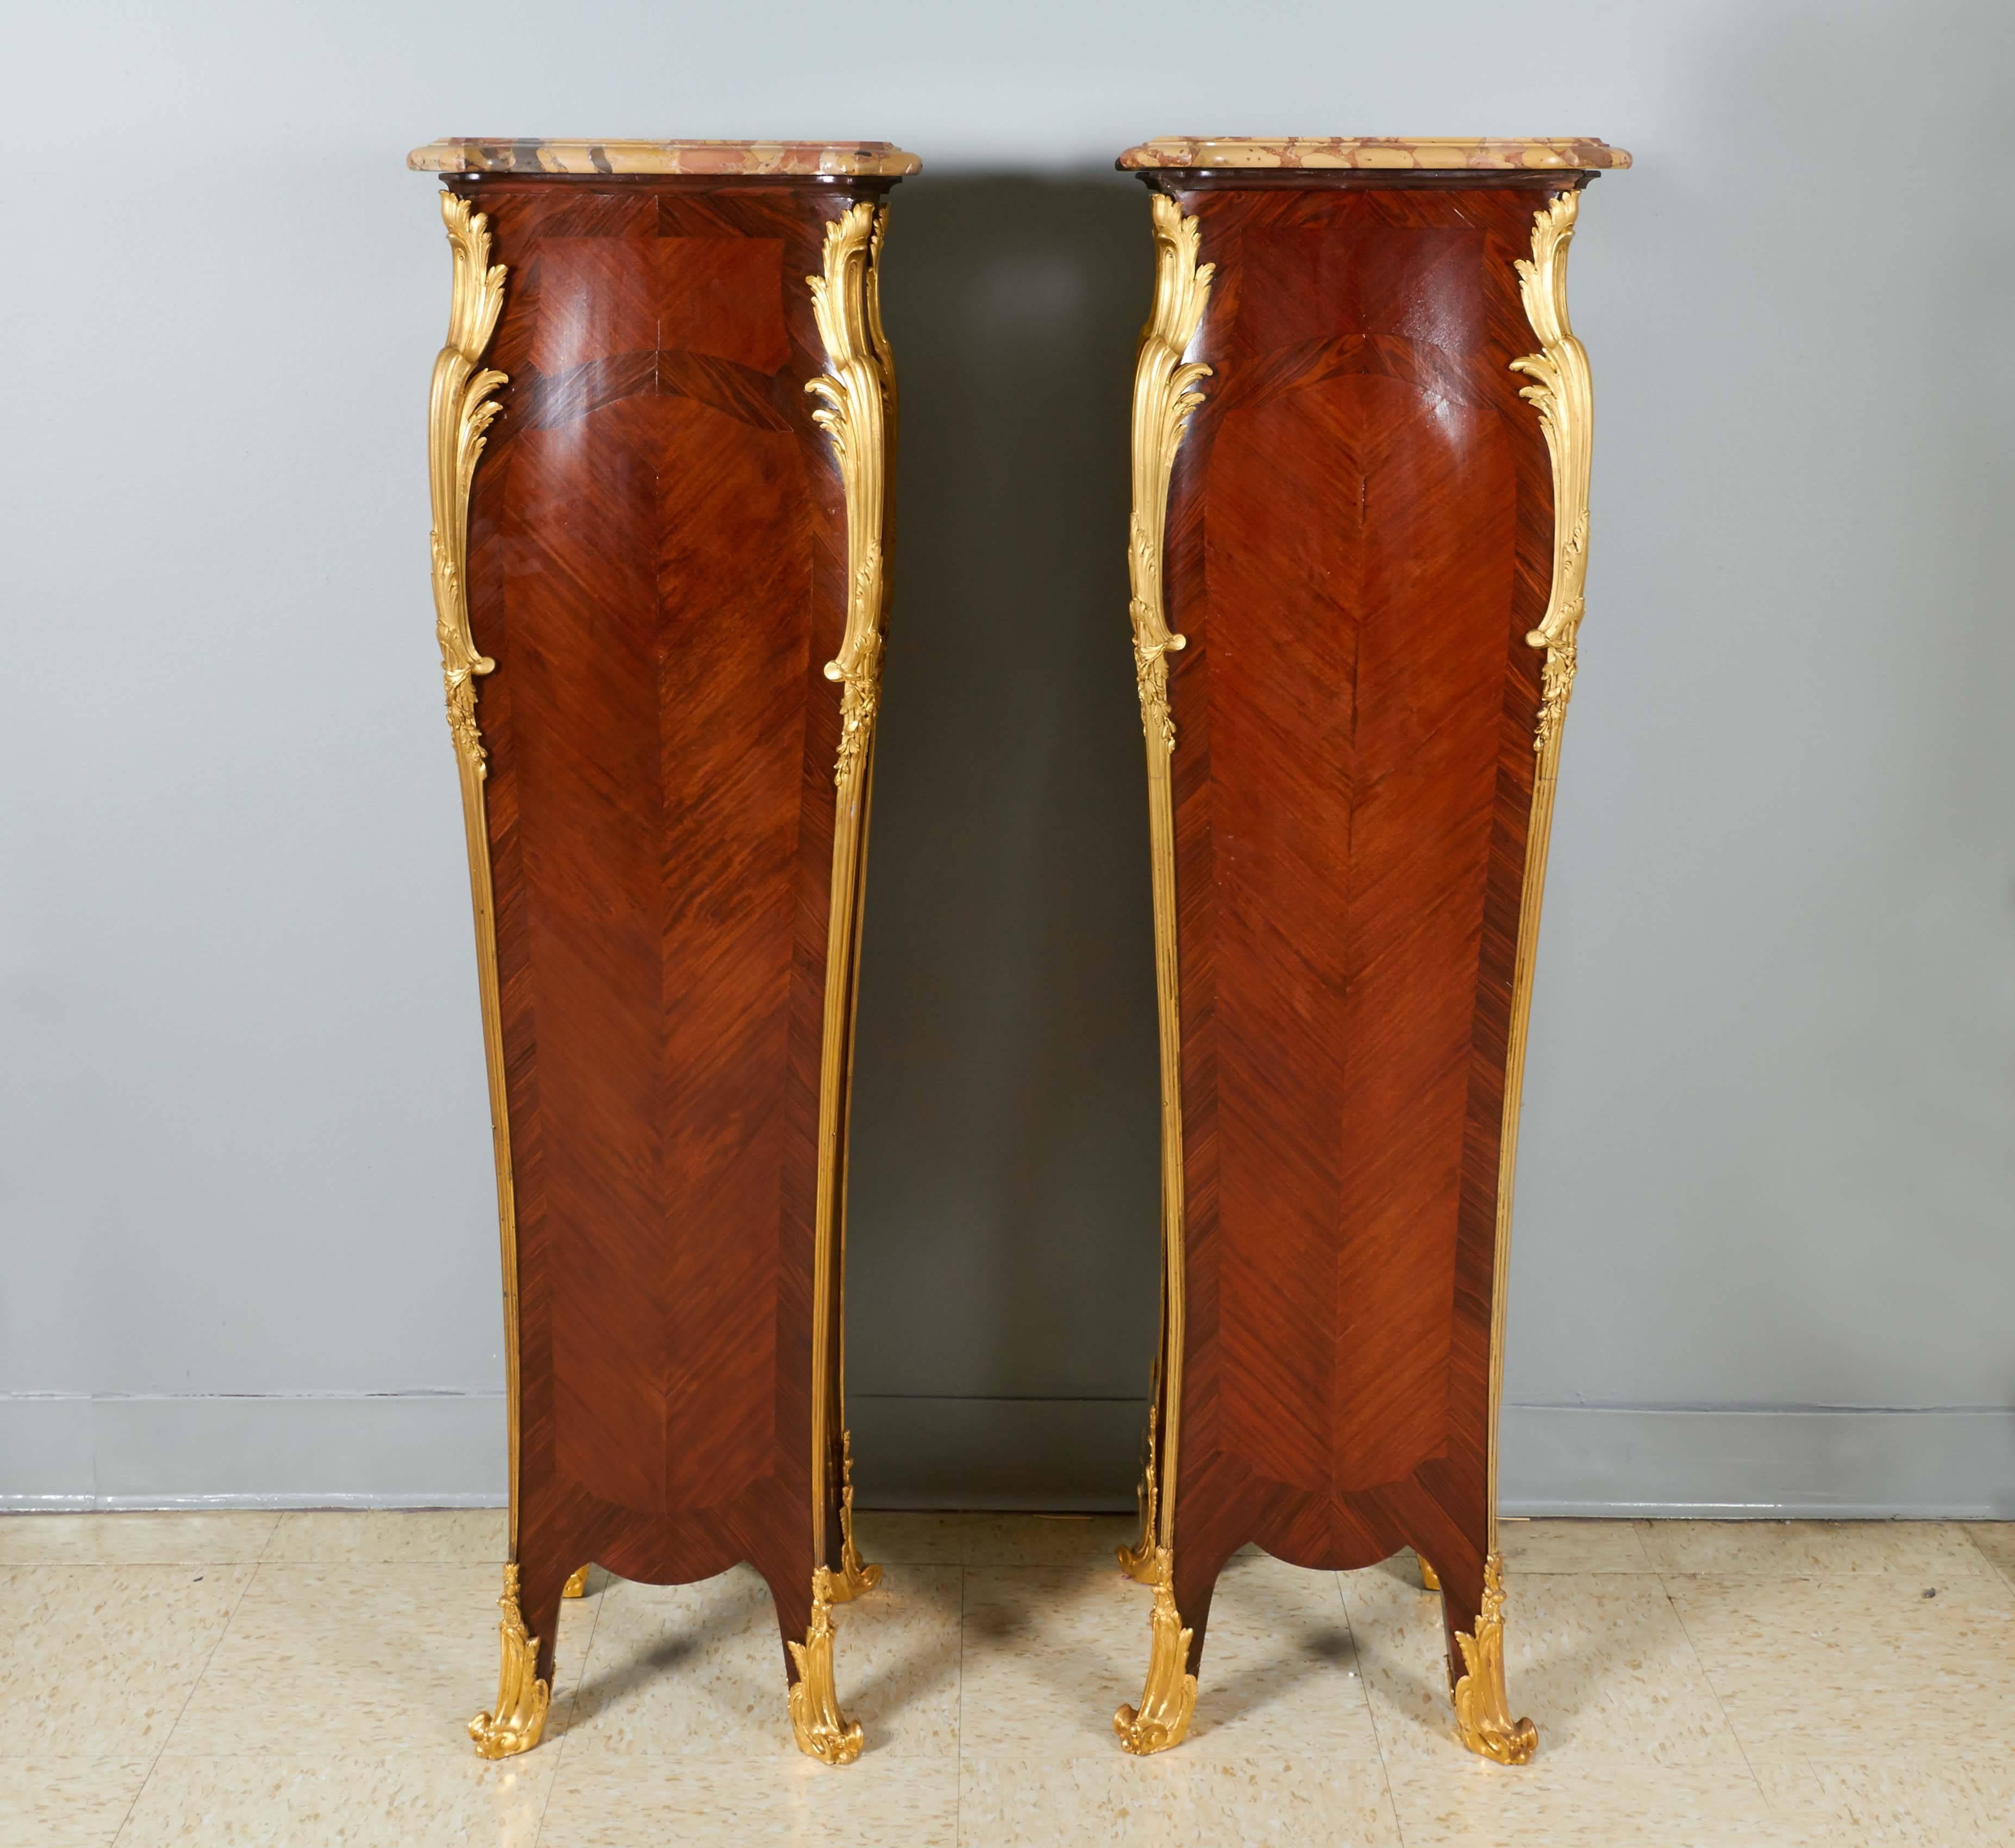 Pair of French Ormolu-Mounted Kingwood Pedestals Signed Millet A. Paris 4